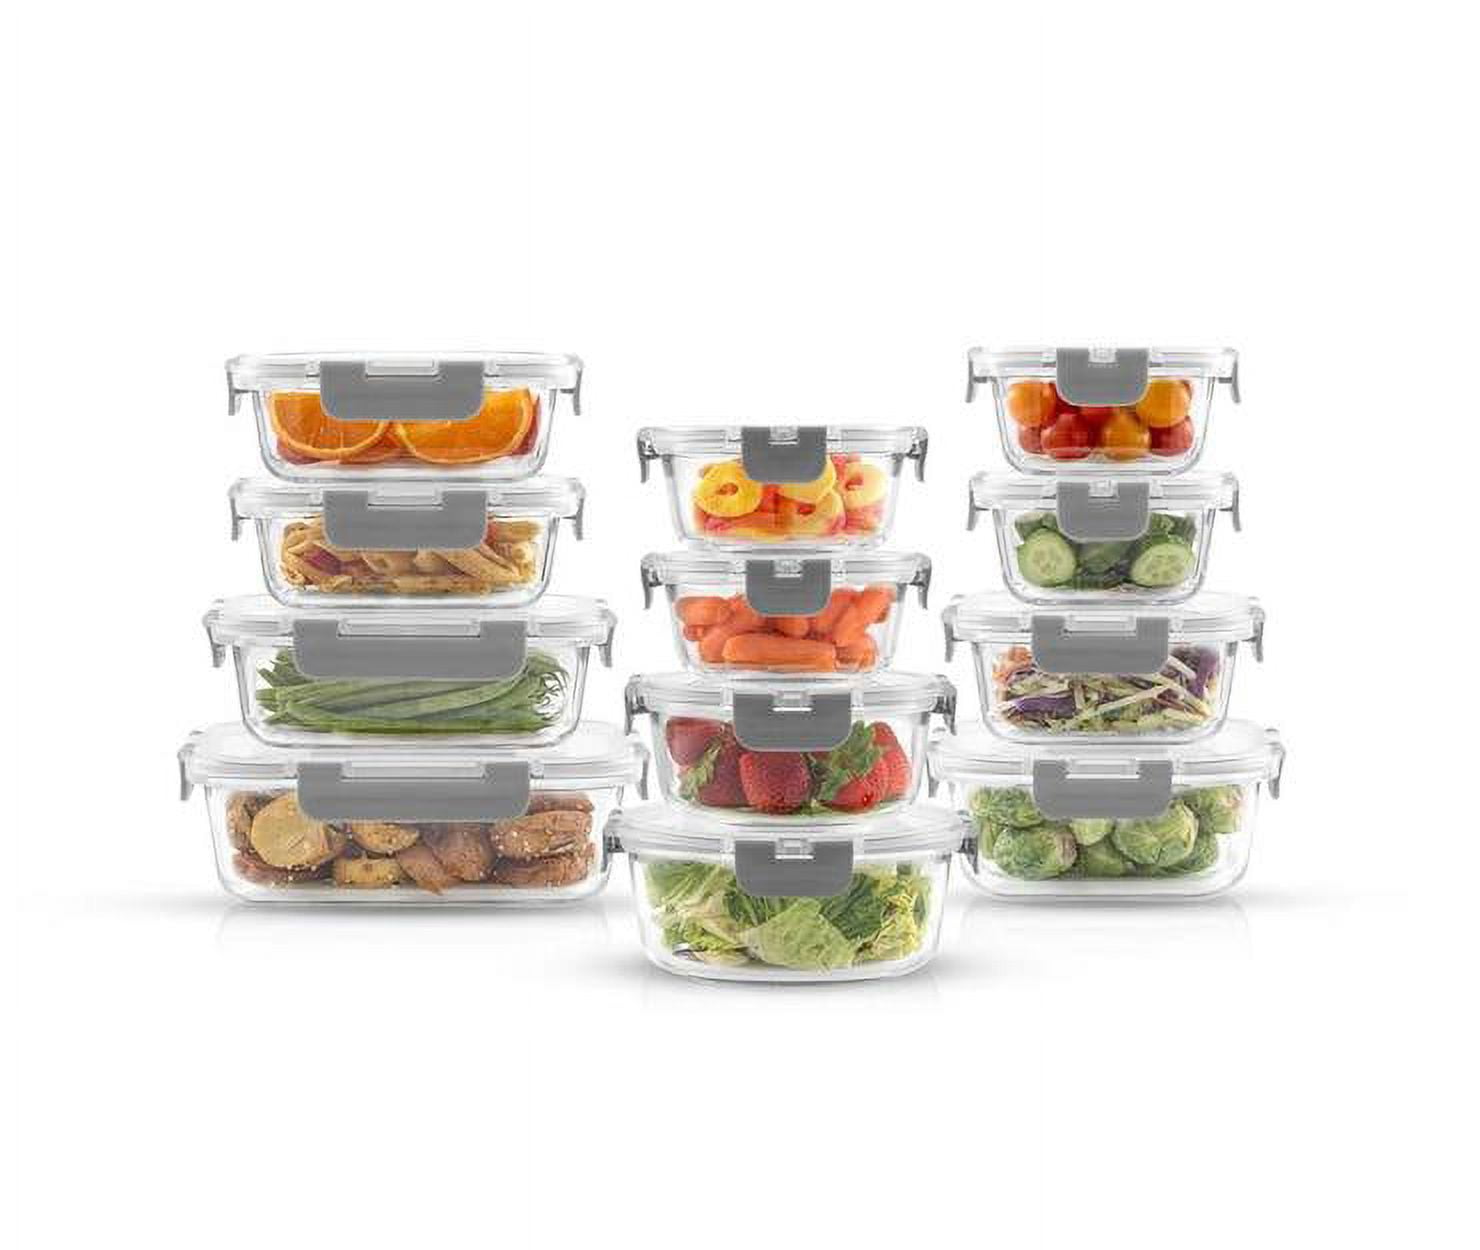  JoyJolt Divided Food Storage Containers with Lids Airtight. 5  Pack Glass Meal Prep Containers 2 Compartment Set Glass Bento Box. Reusable  Food Containers, Portion Control Containers for Weight Loss: Home 